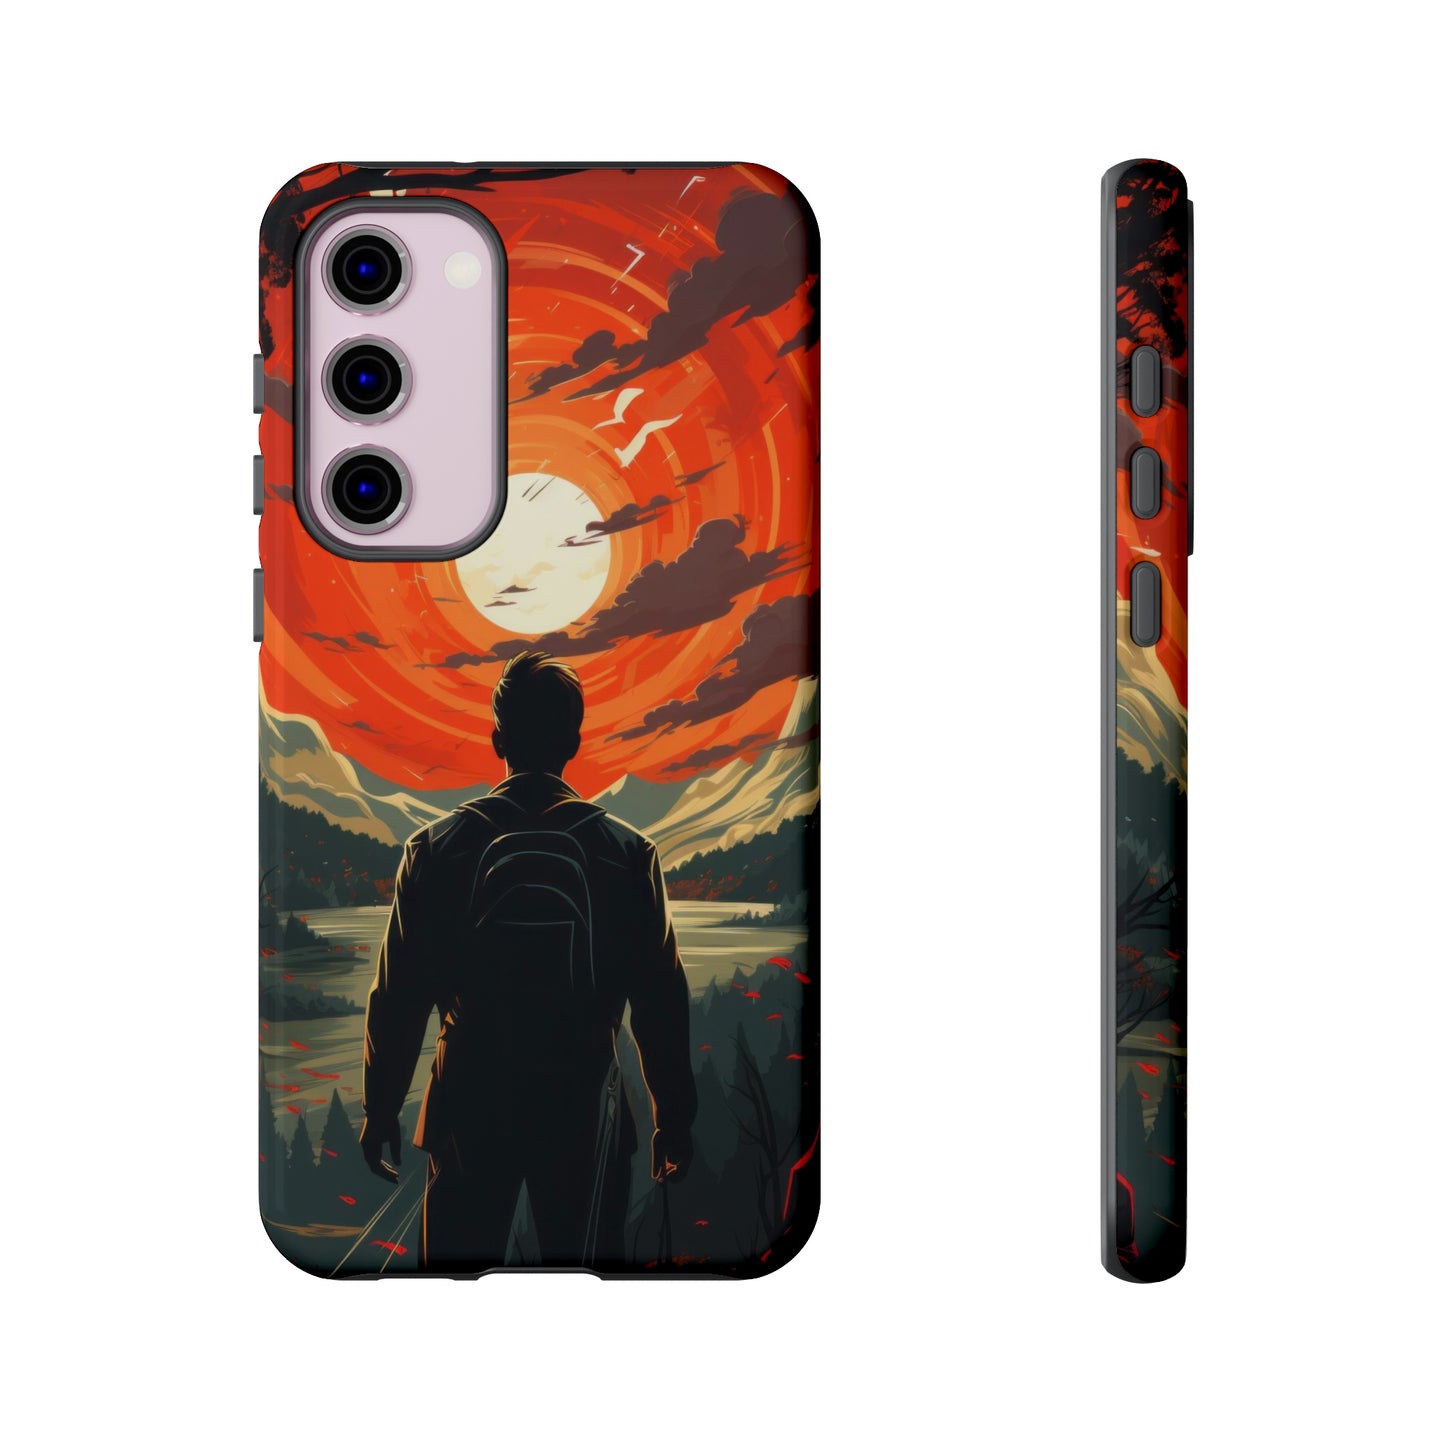 Sunset Contemplation: Man's Silhouette by Lakeside Phone Case for iPhone, Samsung, Pixel